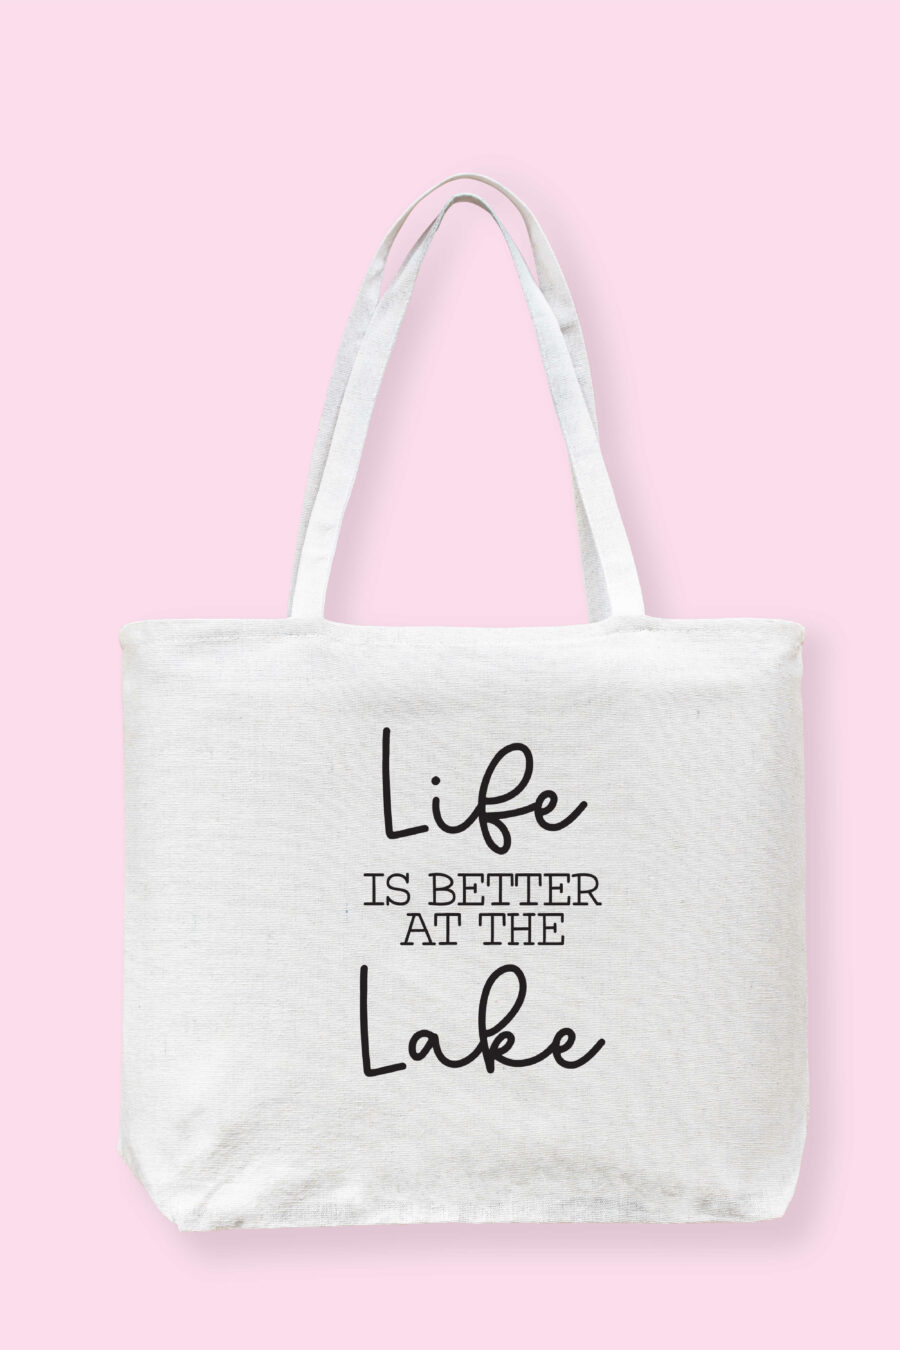 Life is better at the lake tote bag